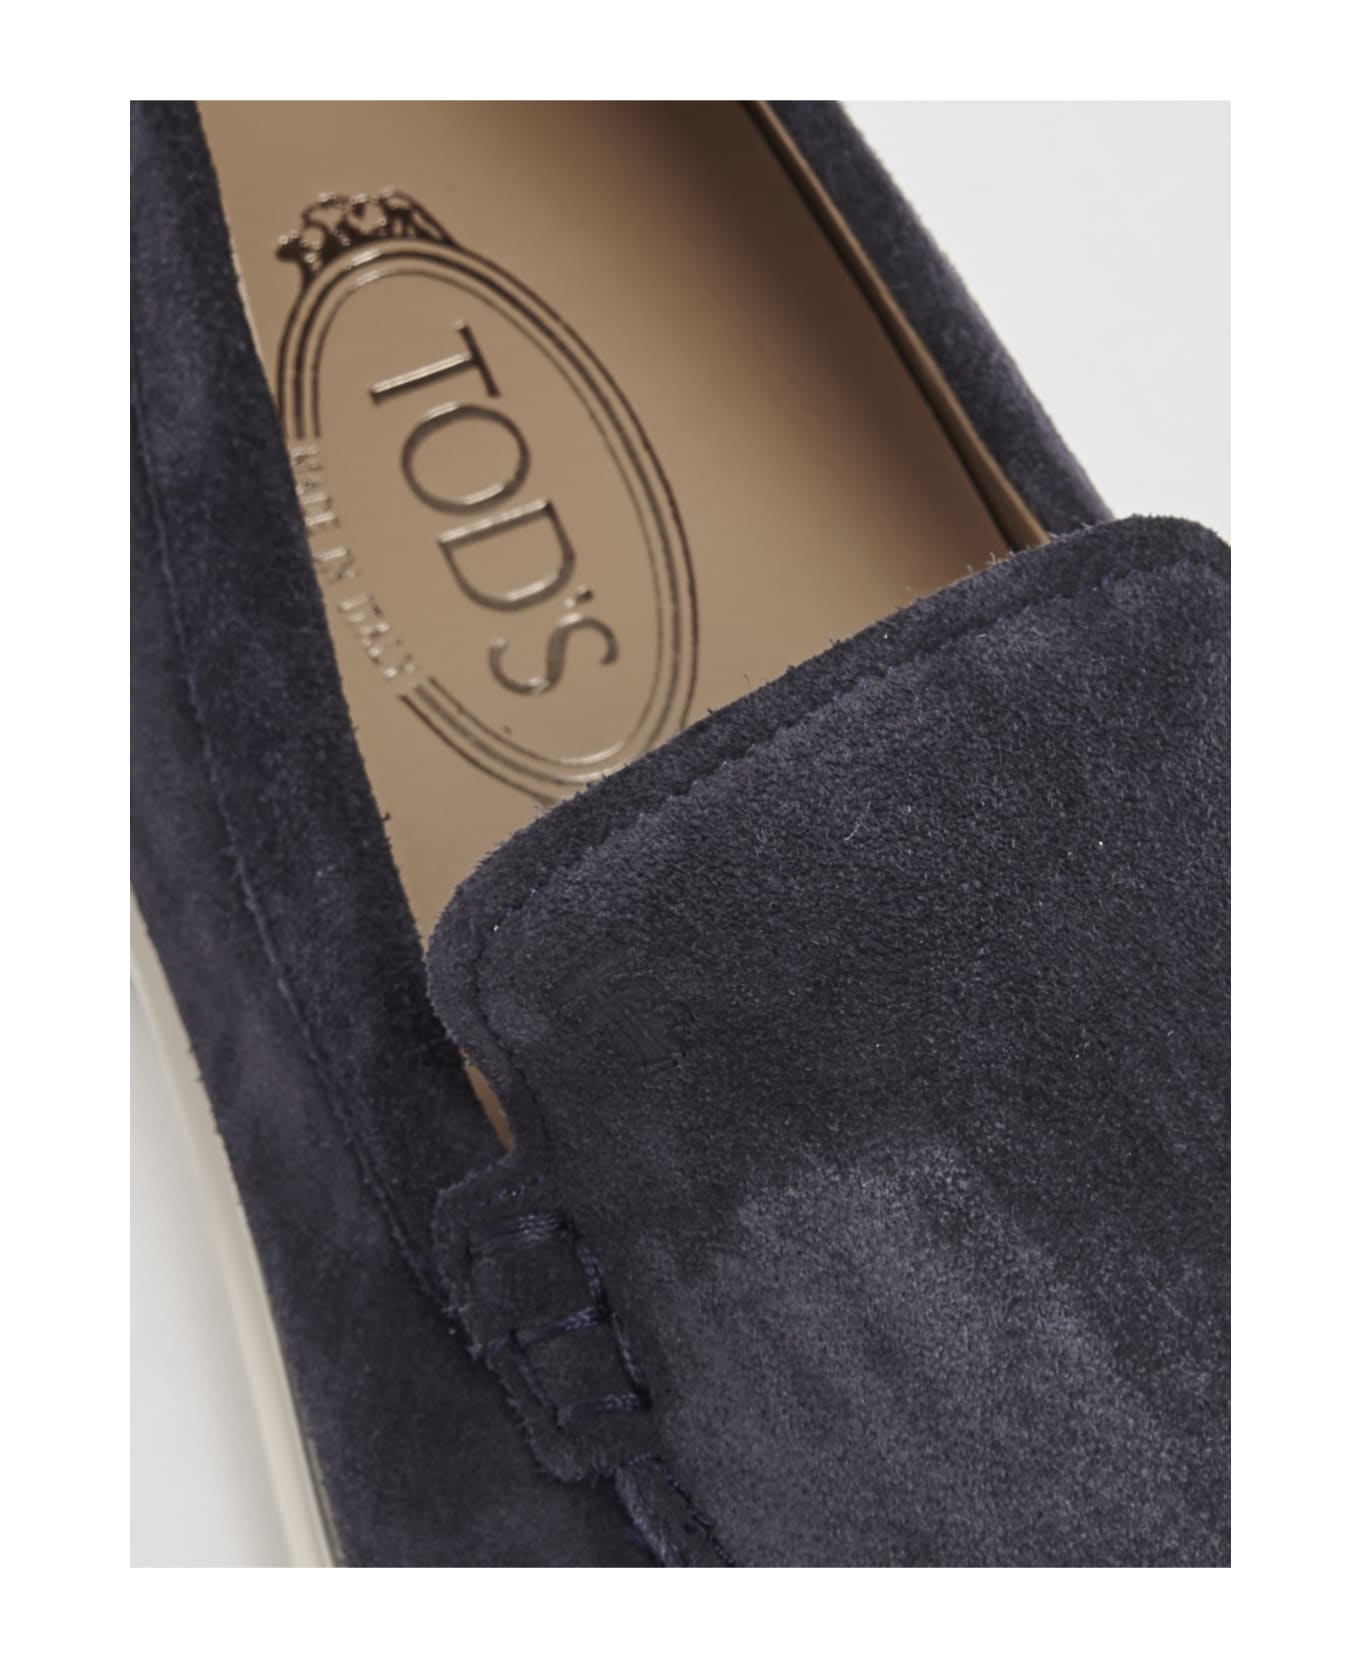 Tod's Suede Loafers - BLU